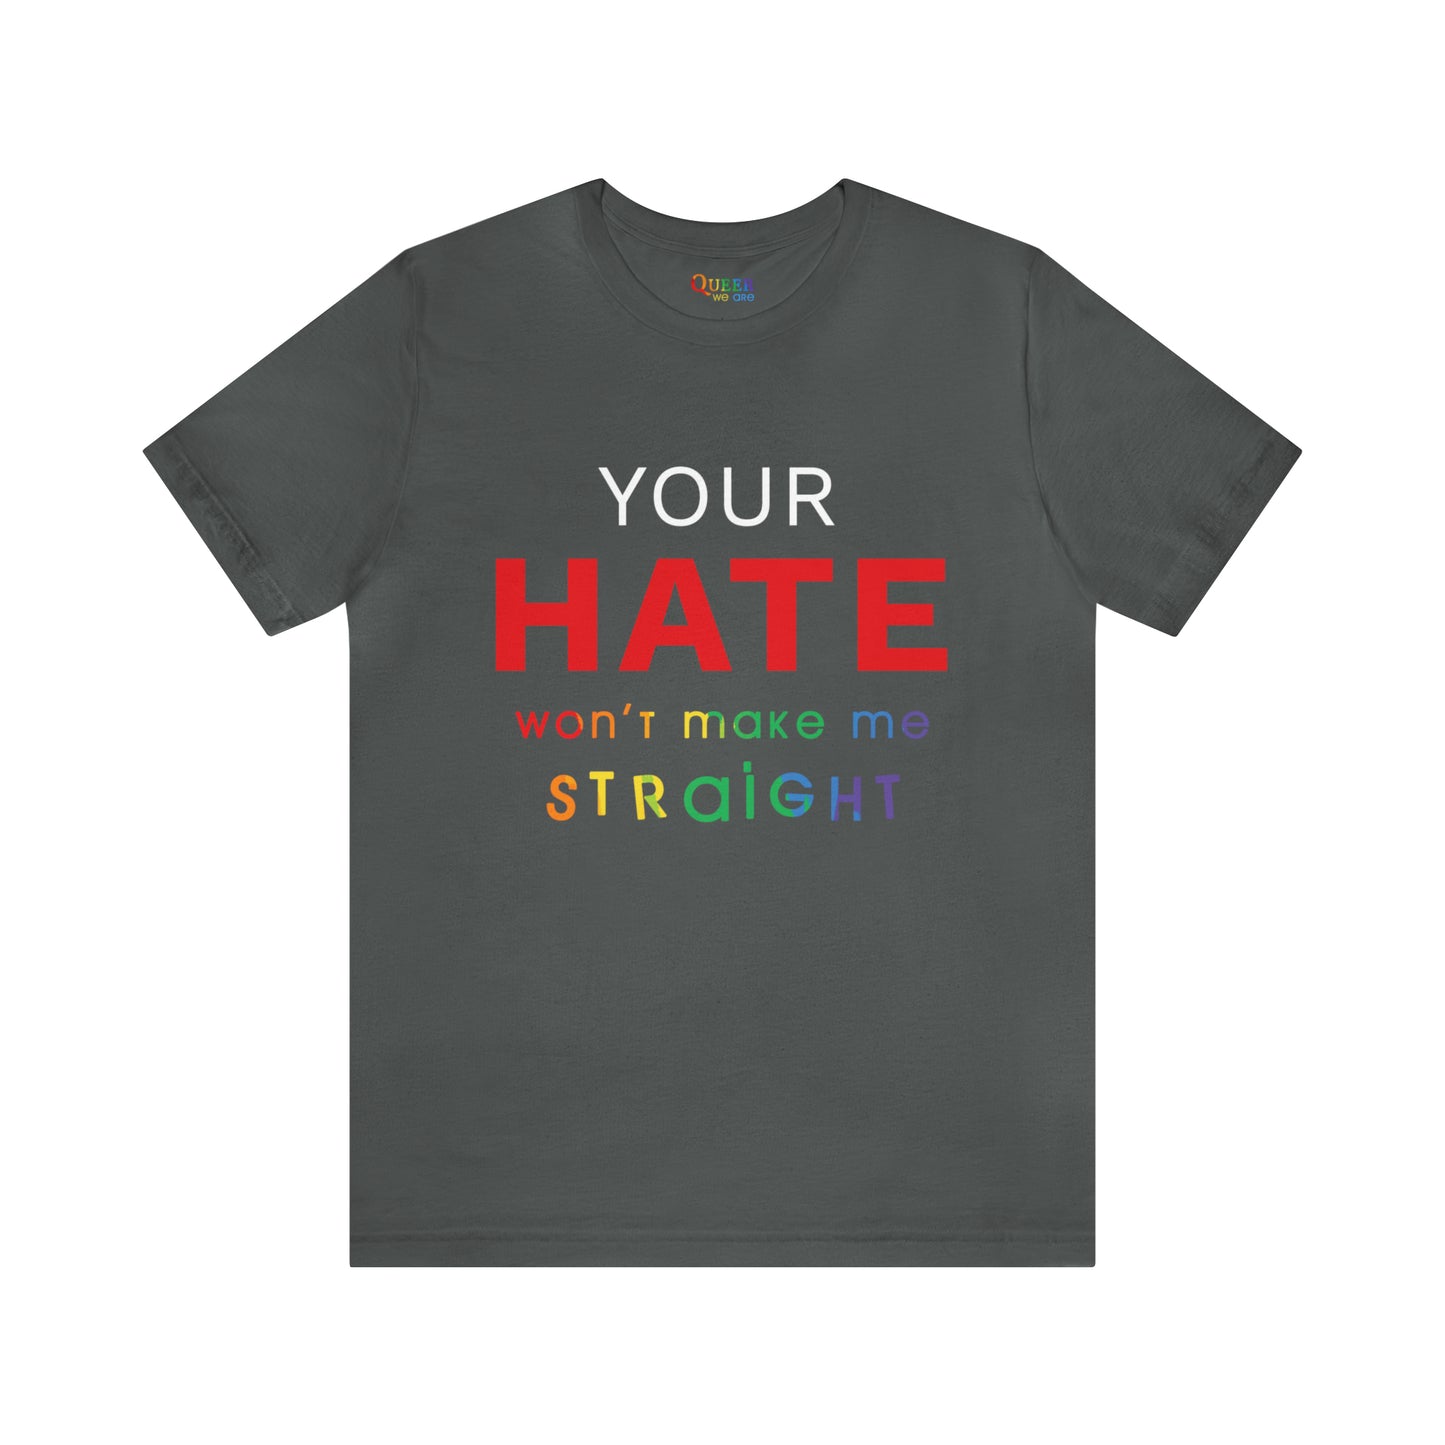 Your Hate Won't Make Me Straight Unisex T-Shirt - Queer We Are Shop